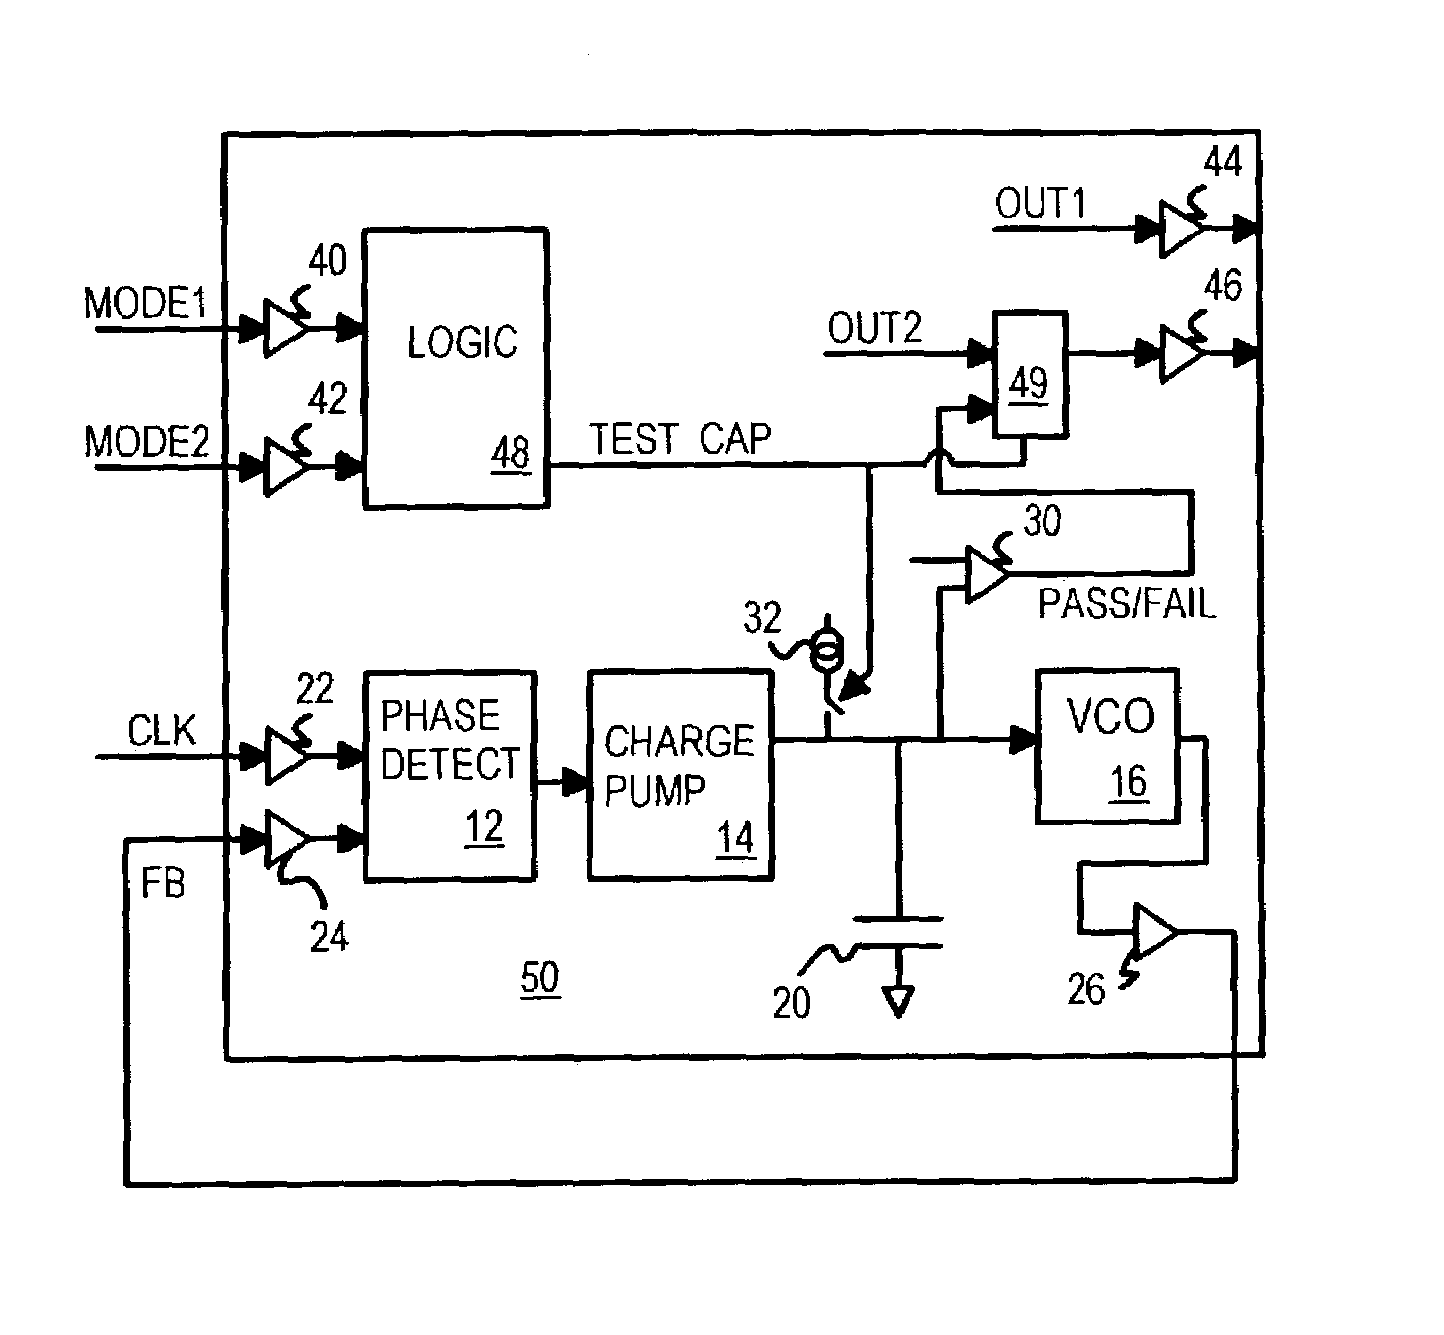 PLL with built-in filter-capacitor leakage-tester with current pump and comparator